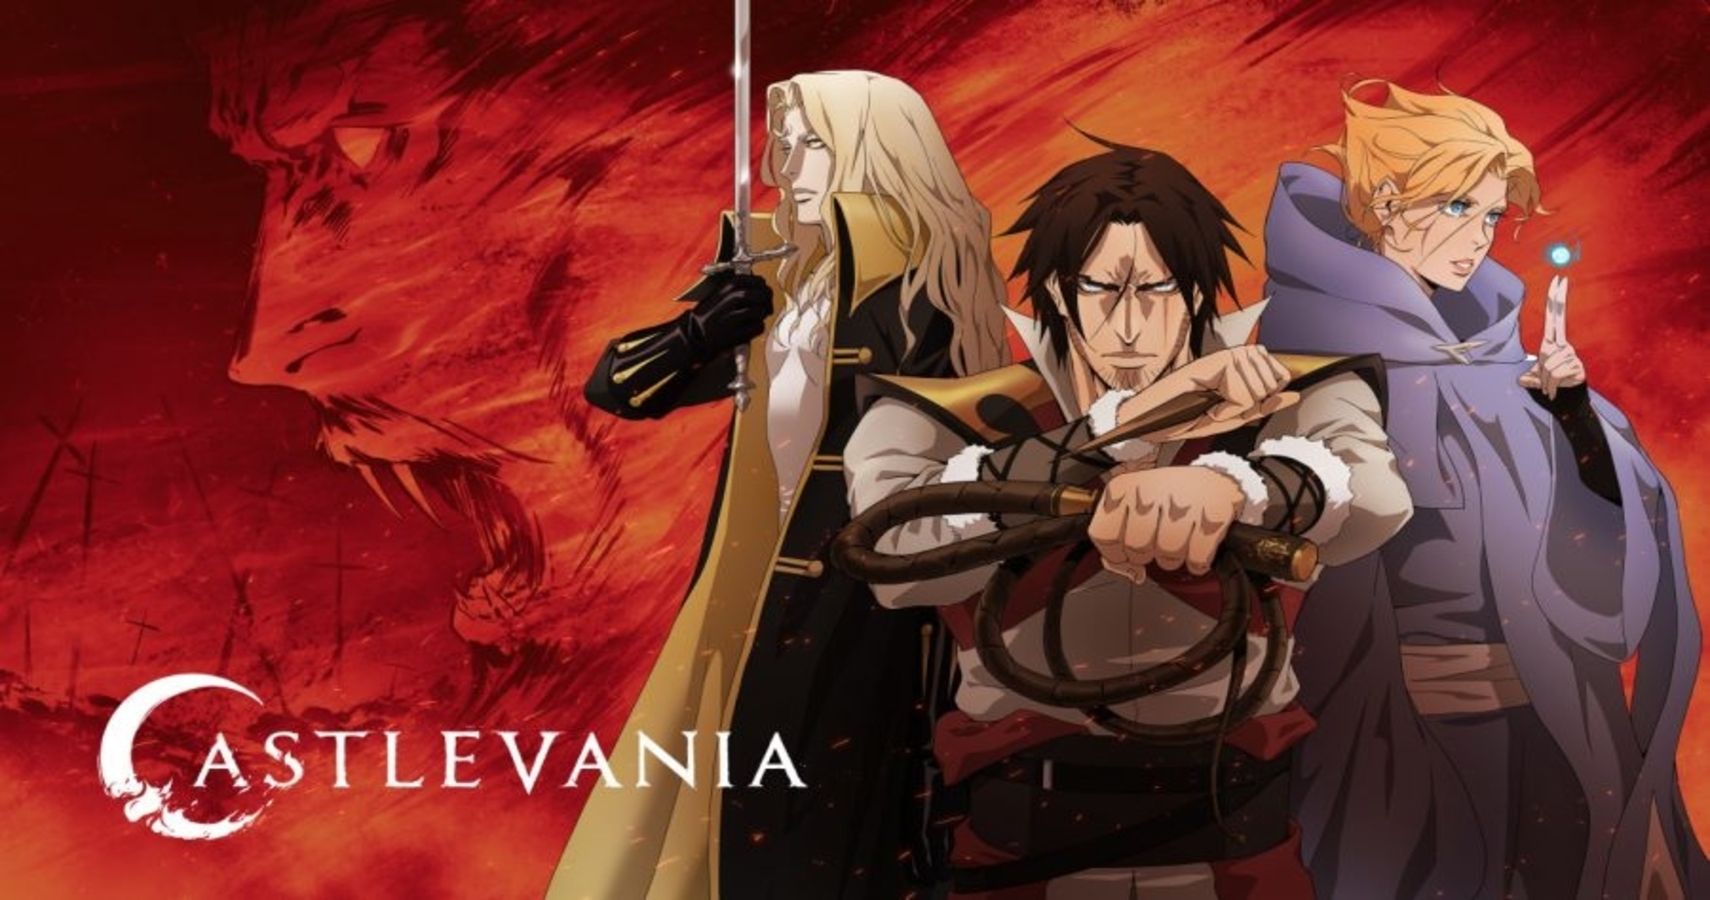 Anime To Watch If You Like Castlevania – Vampire Hunter D